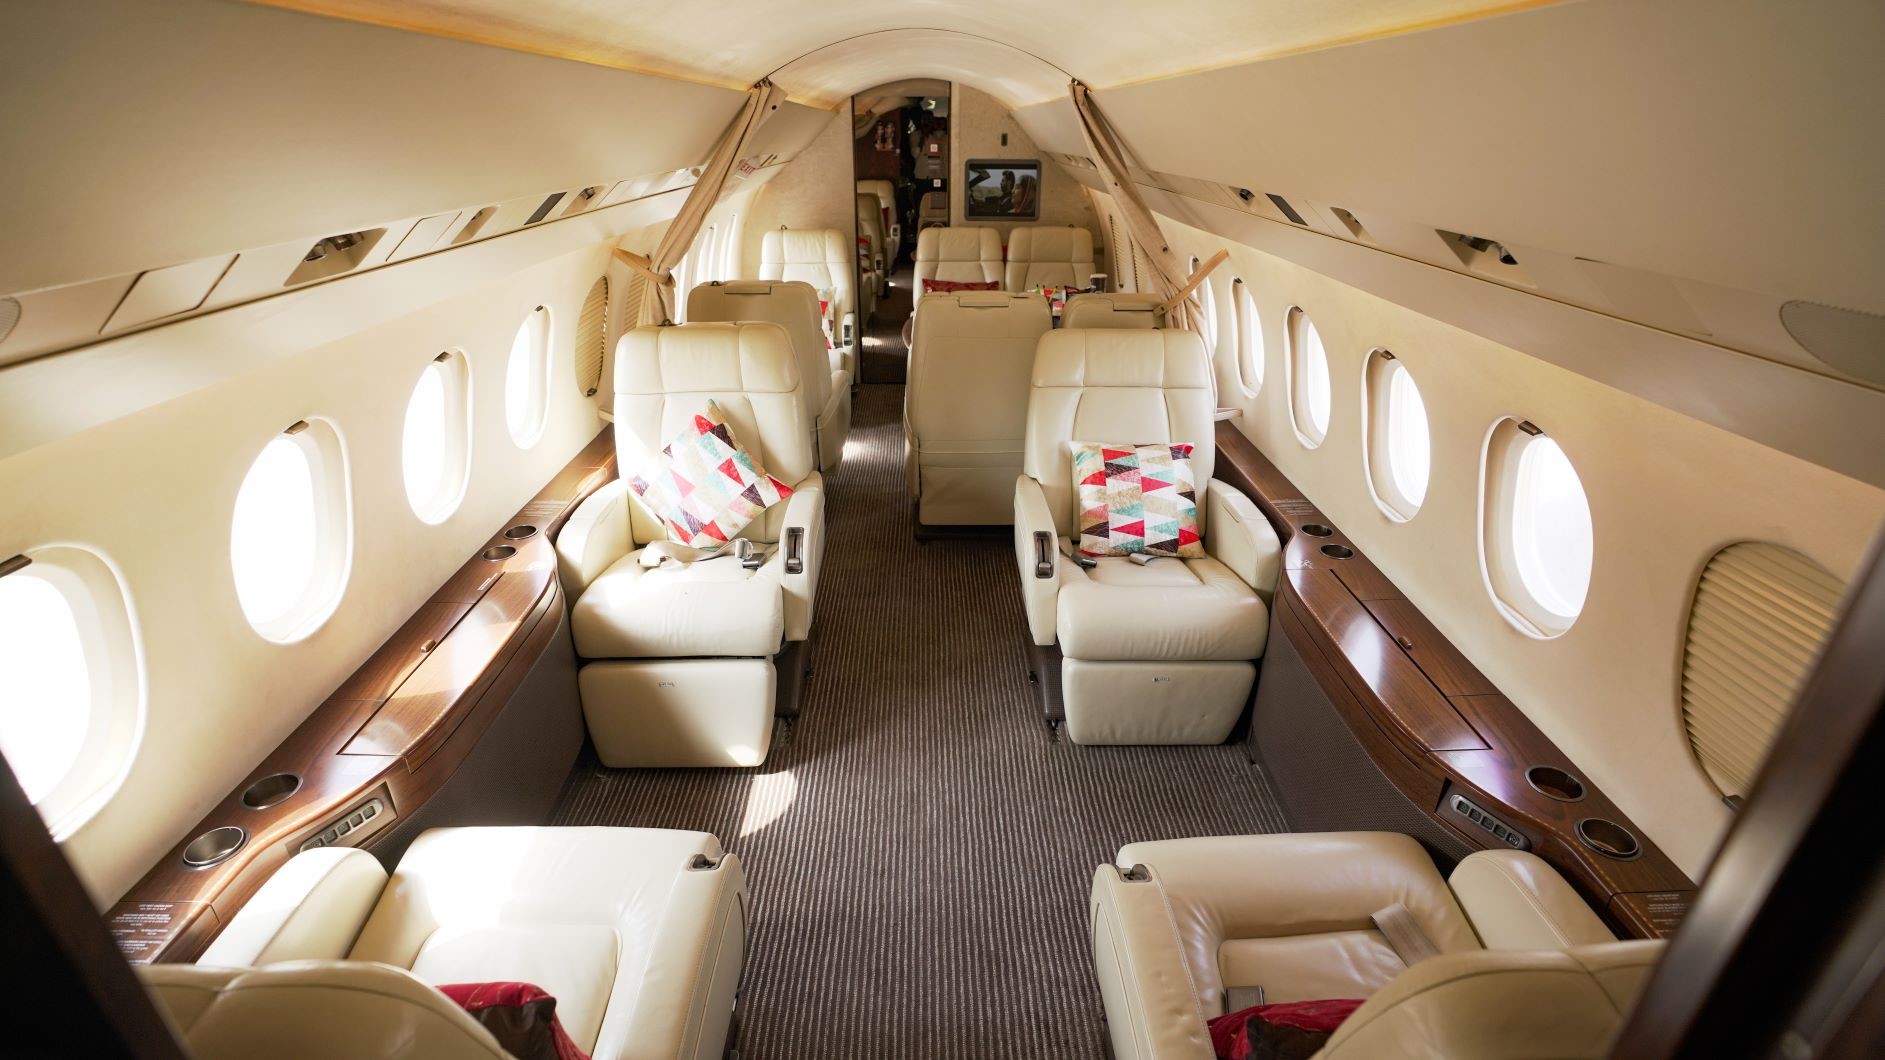 HOW MUCH LUGGAGE SPACE IS IN A PRIVATE JET?